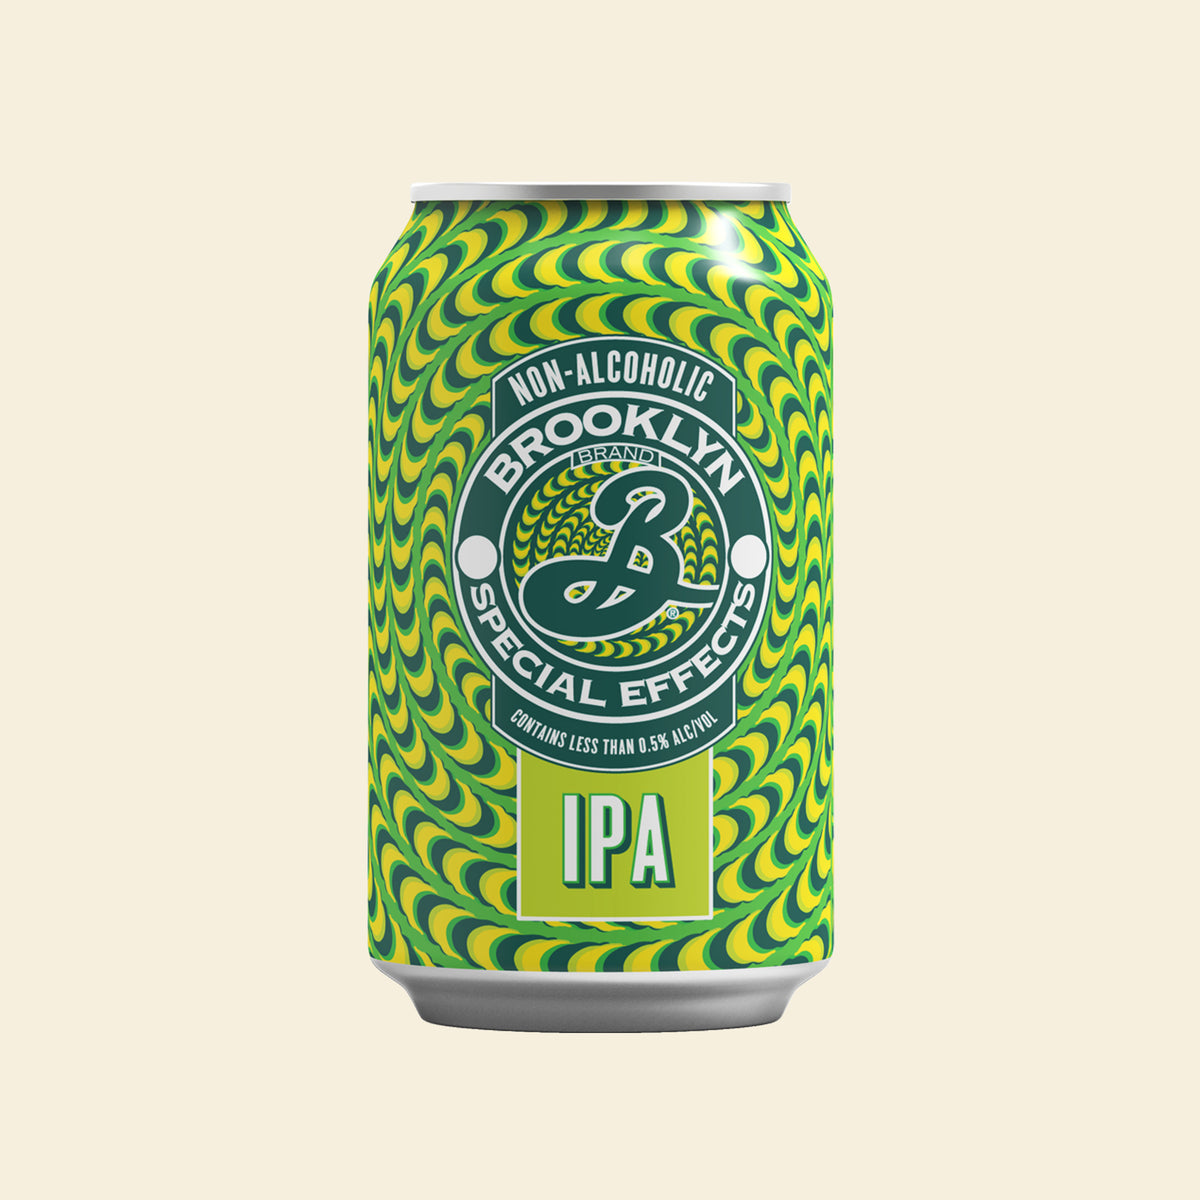 Brooklyn Special Effects IPA Nonalcoholic Beer